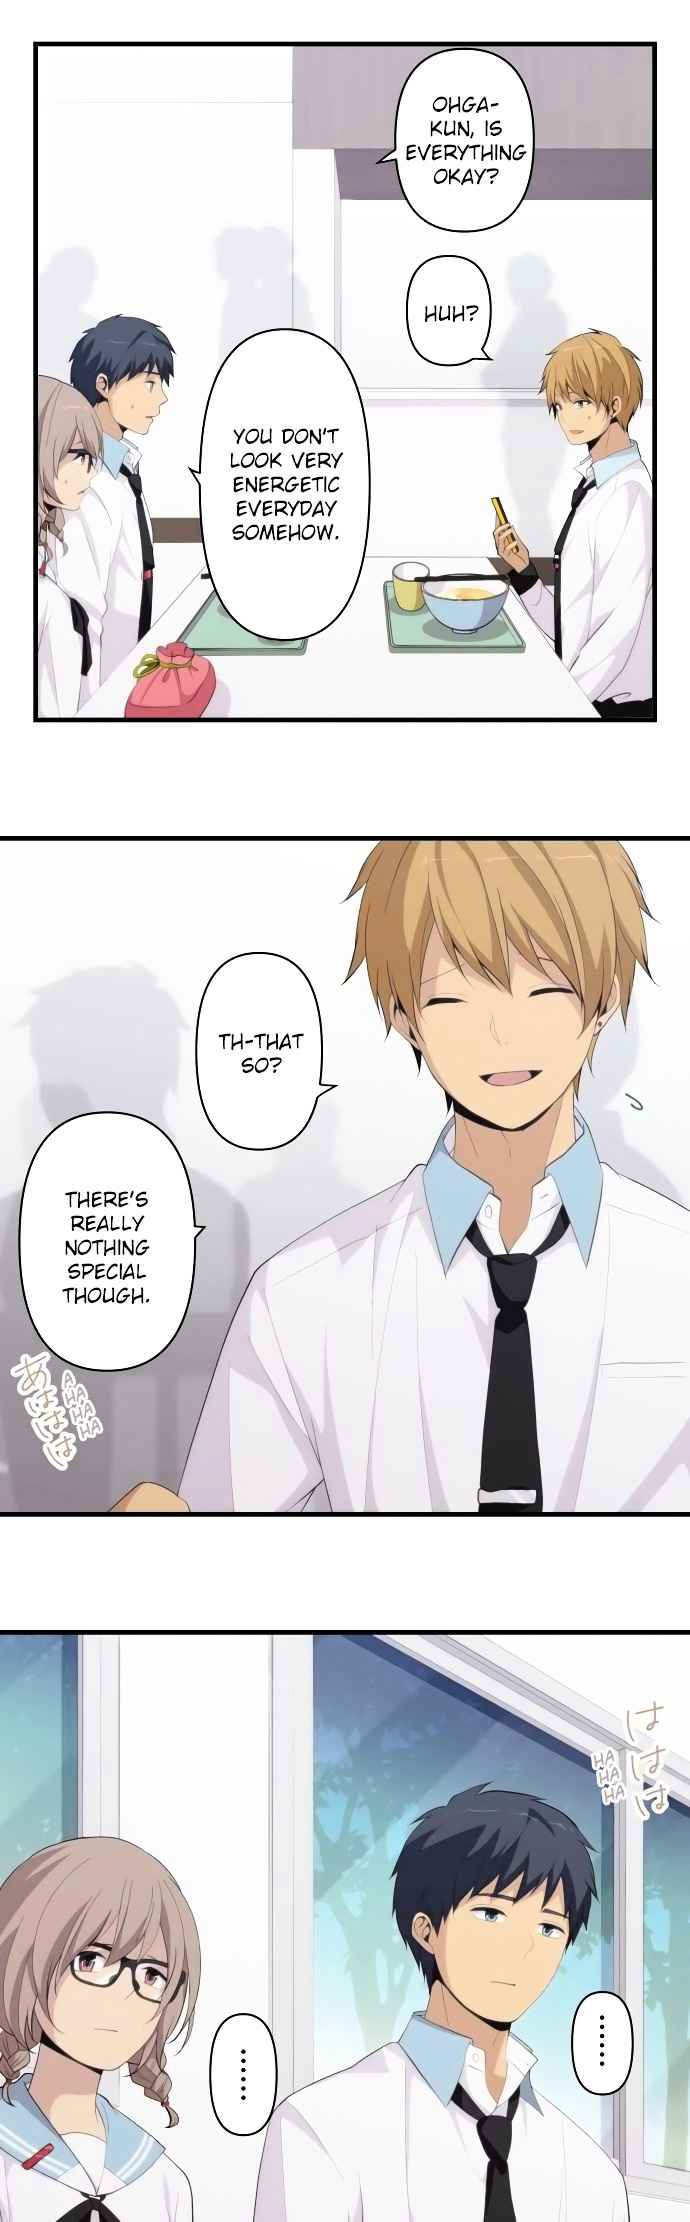 Relife 161 2